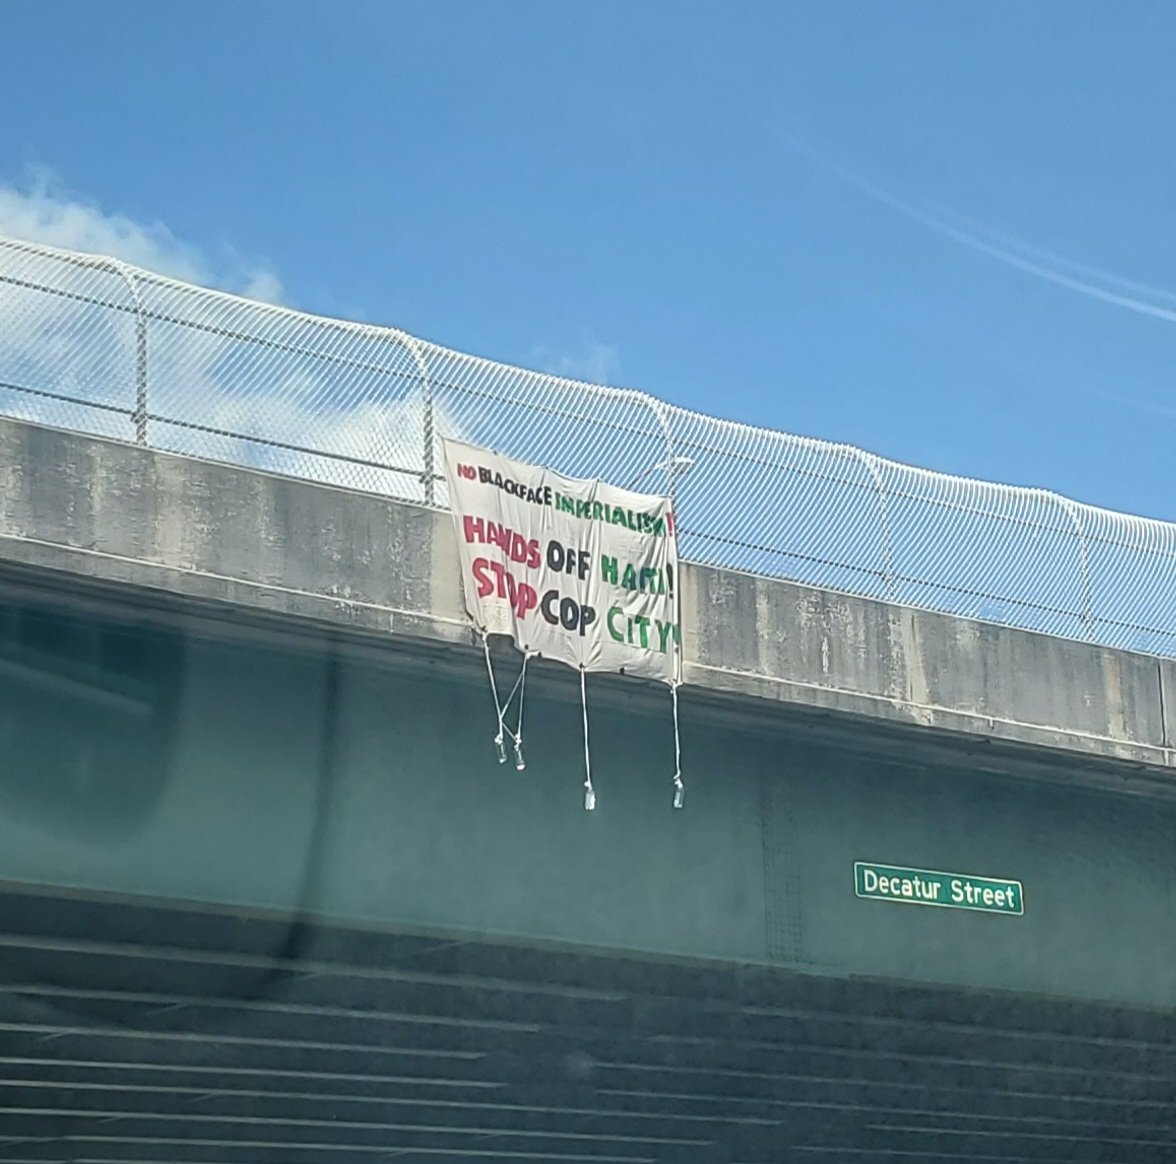 Seen off the Downtown Connector in #Atlanta on the Decatur St. overpass. #StopCopCity